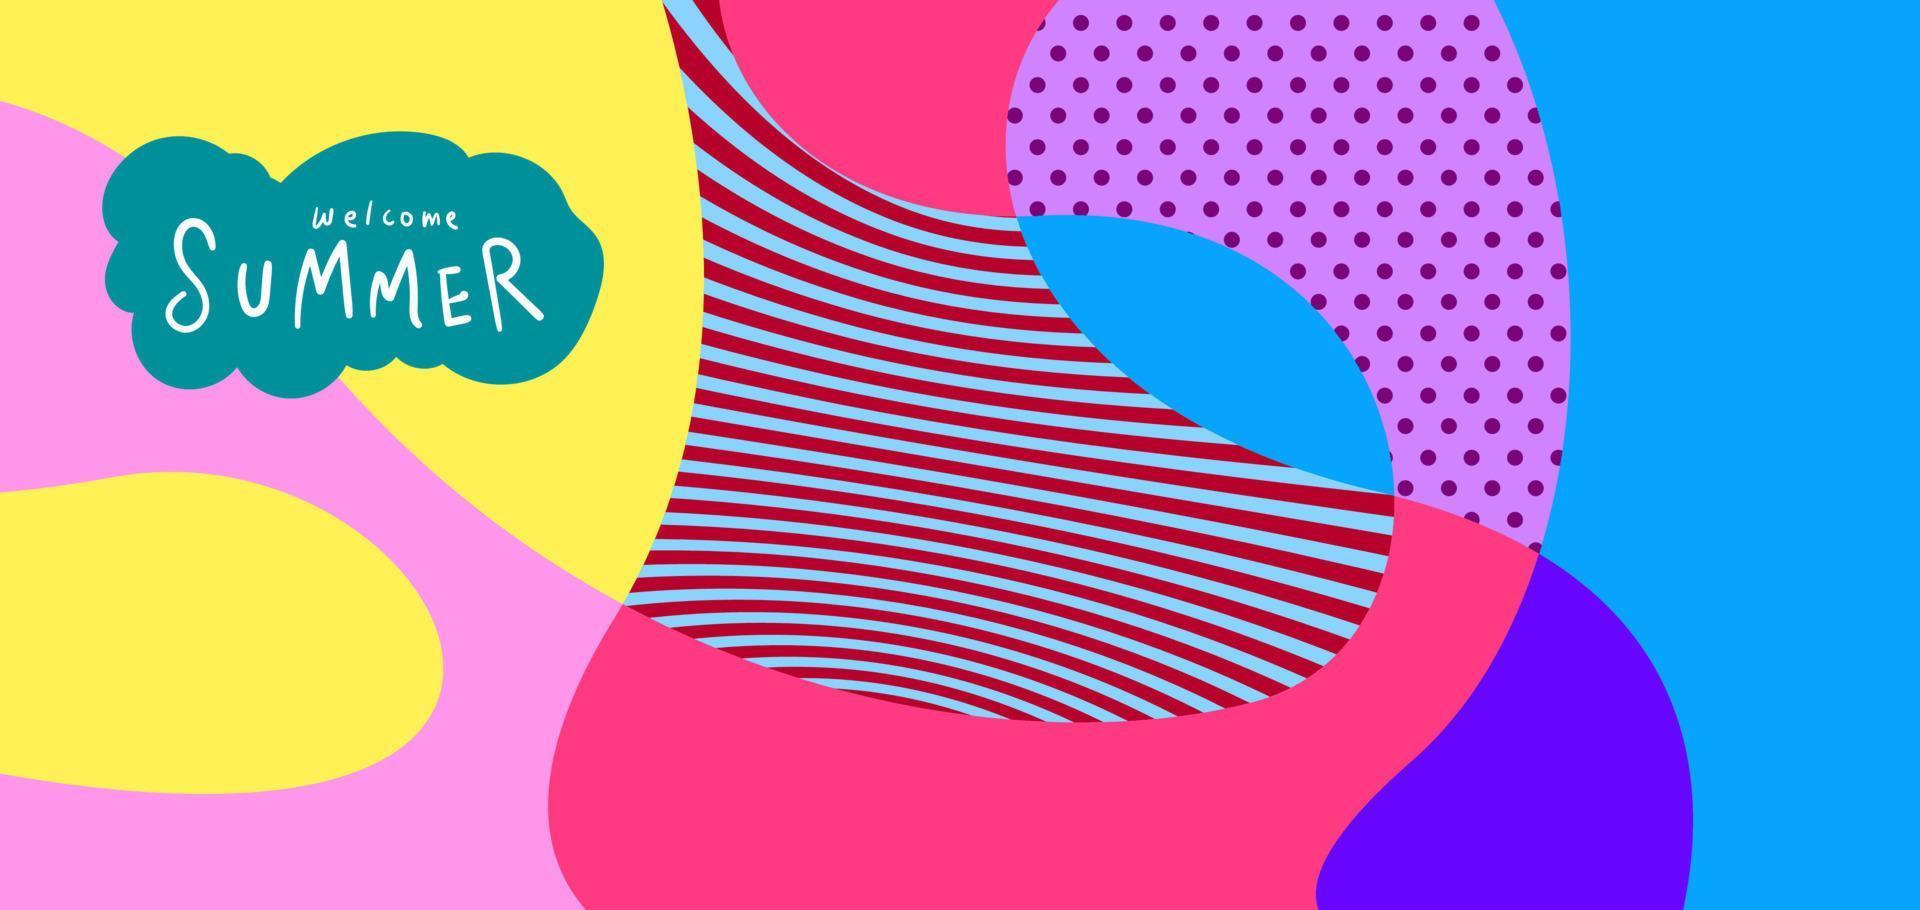 Colorful abstract curve and fluid background for summer banner vector